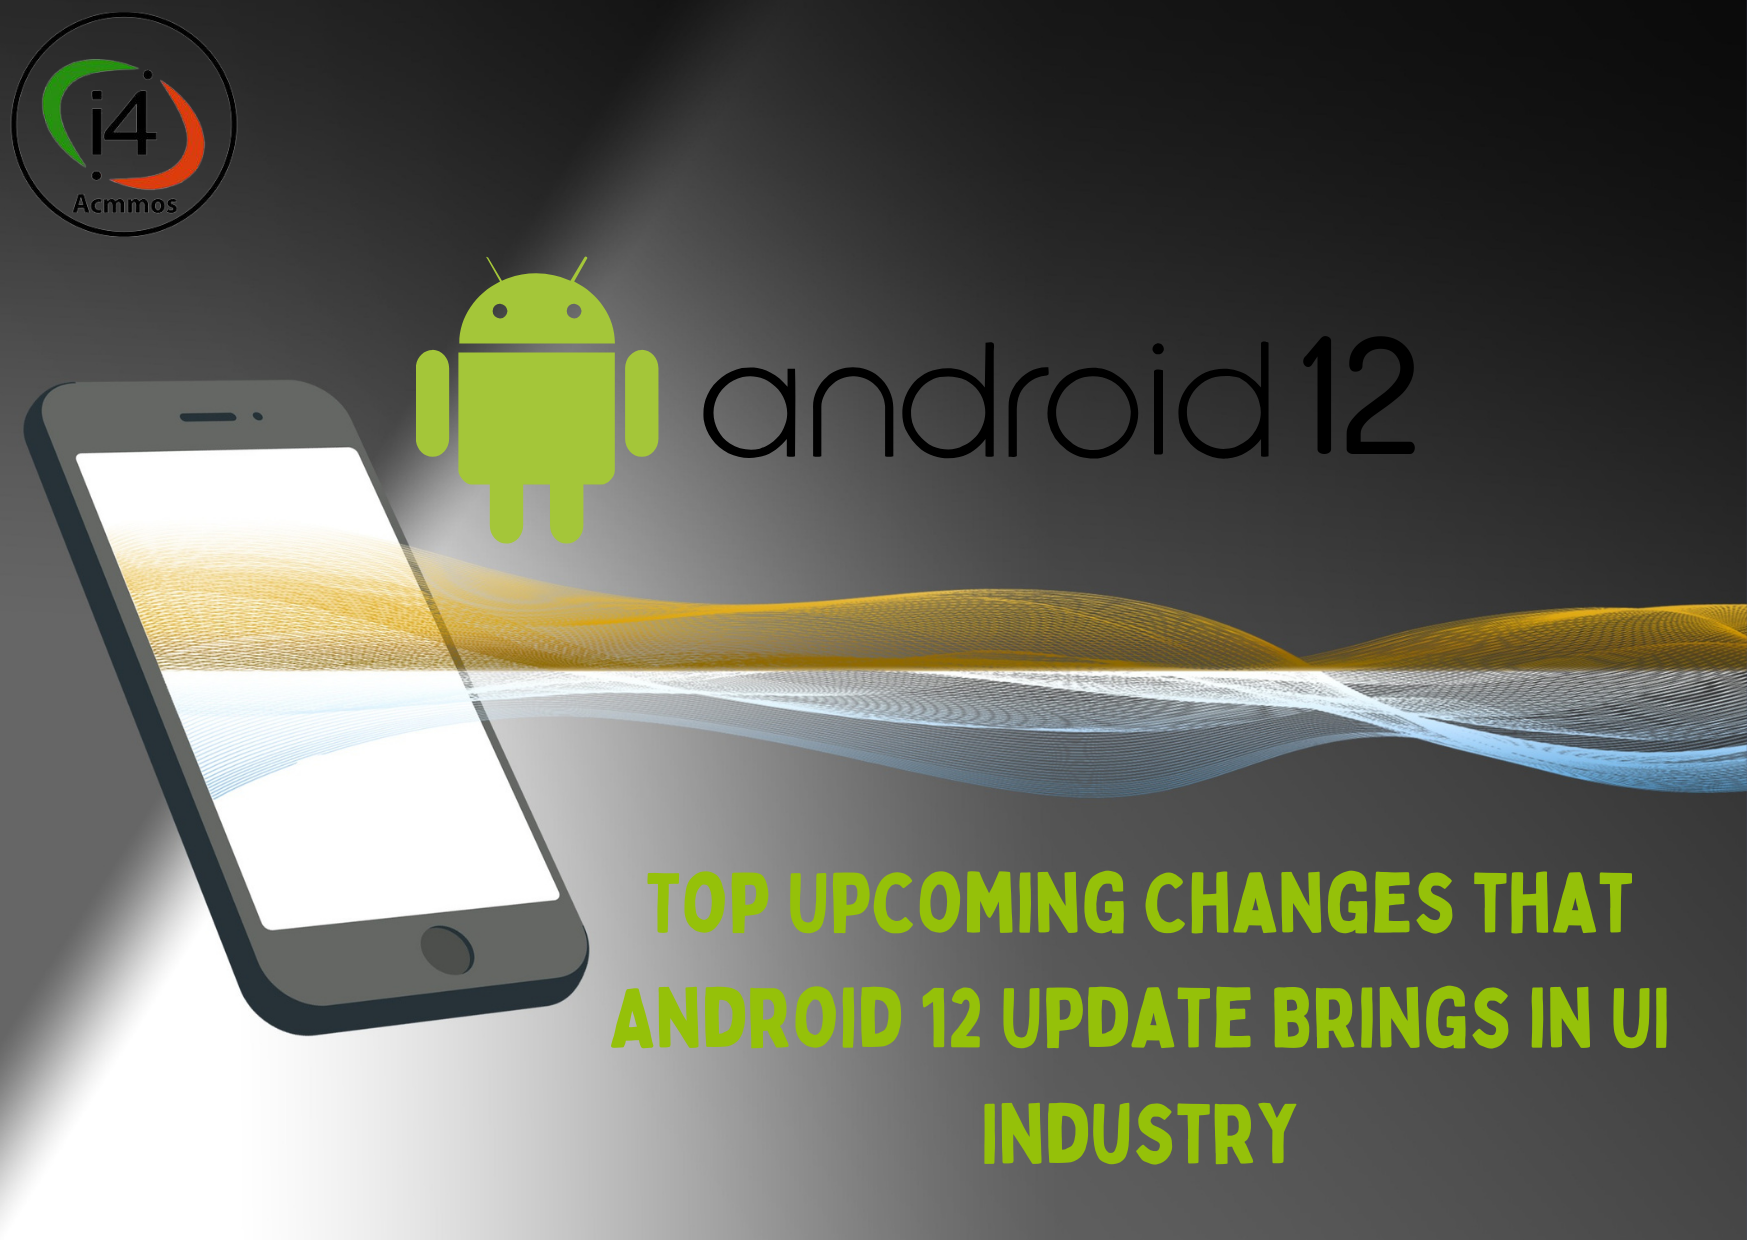 Top Upcoming Changes that Android 12 Update Brings in UI Industry